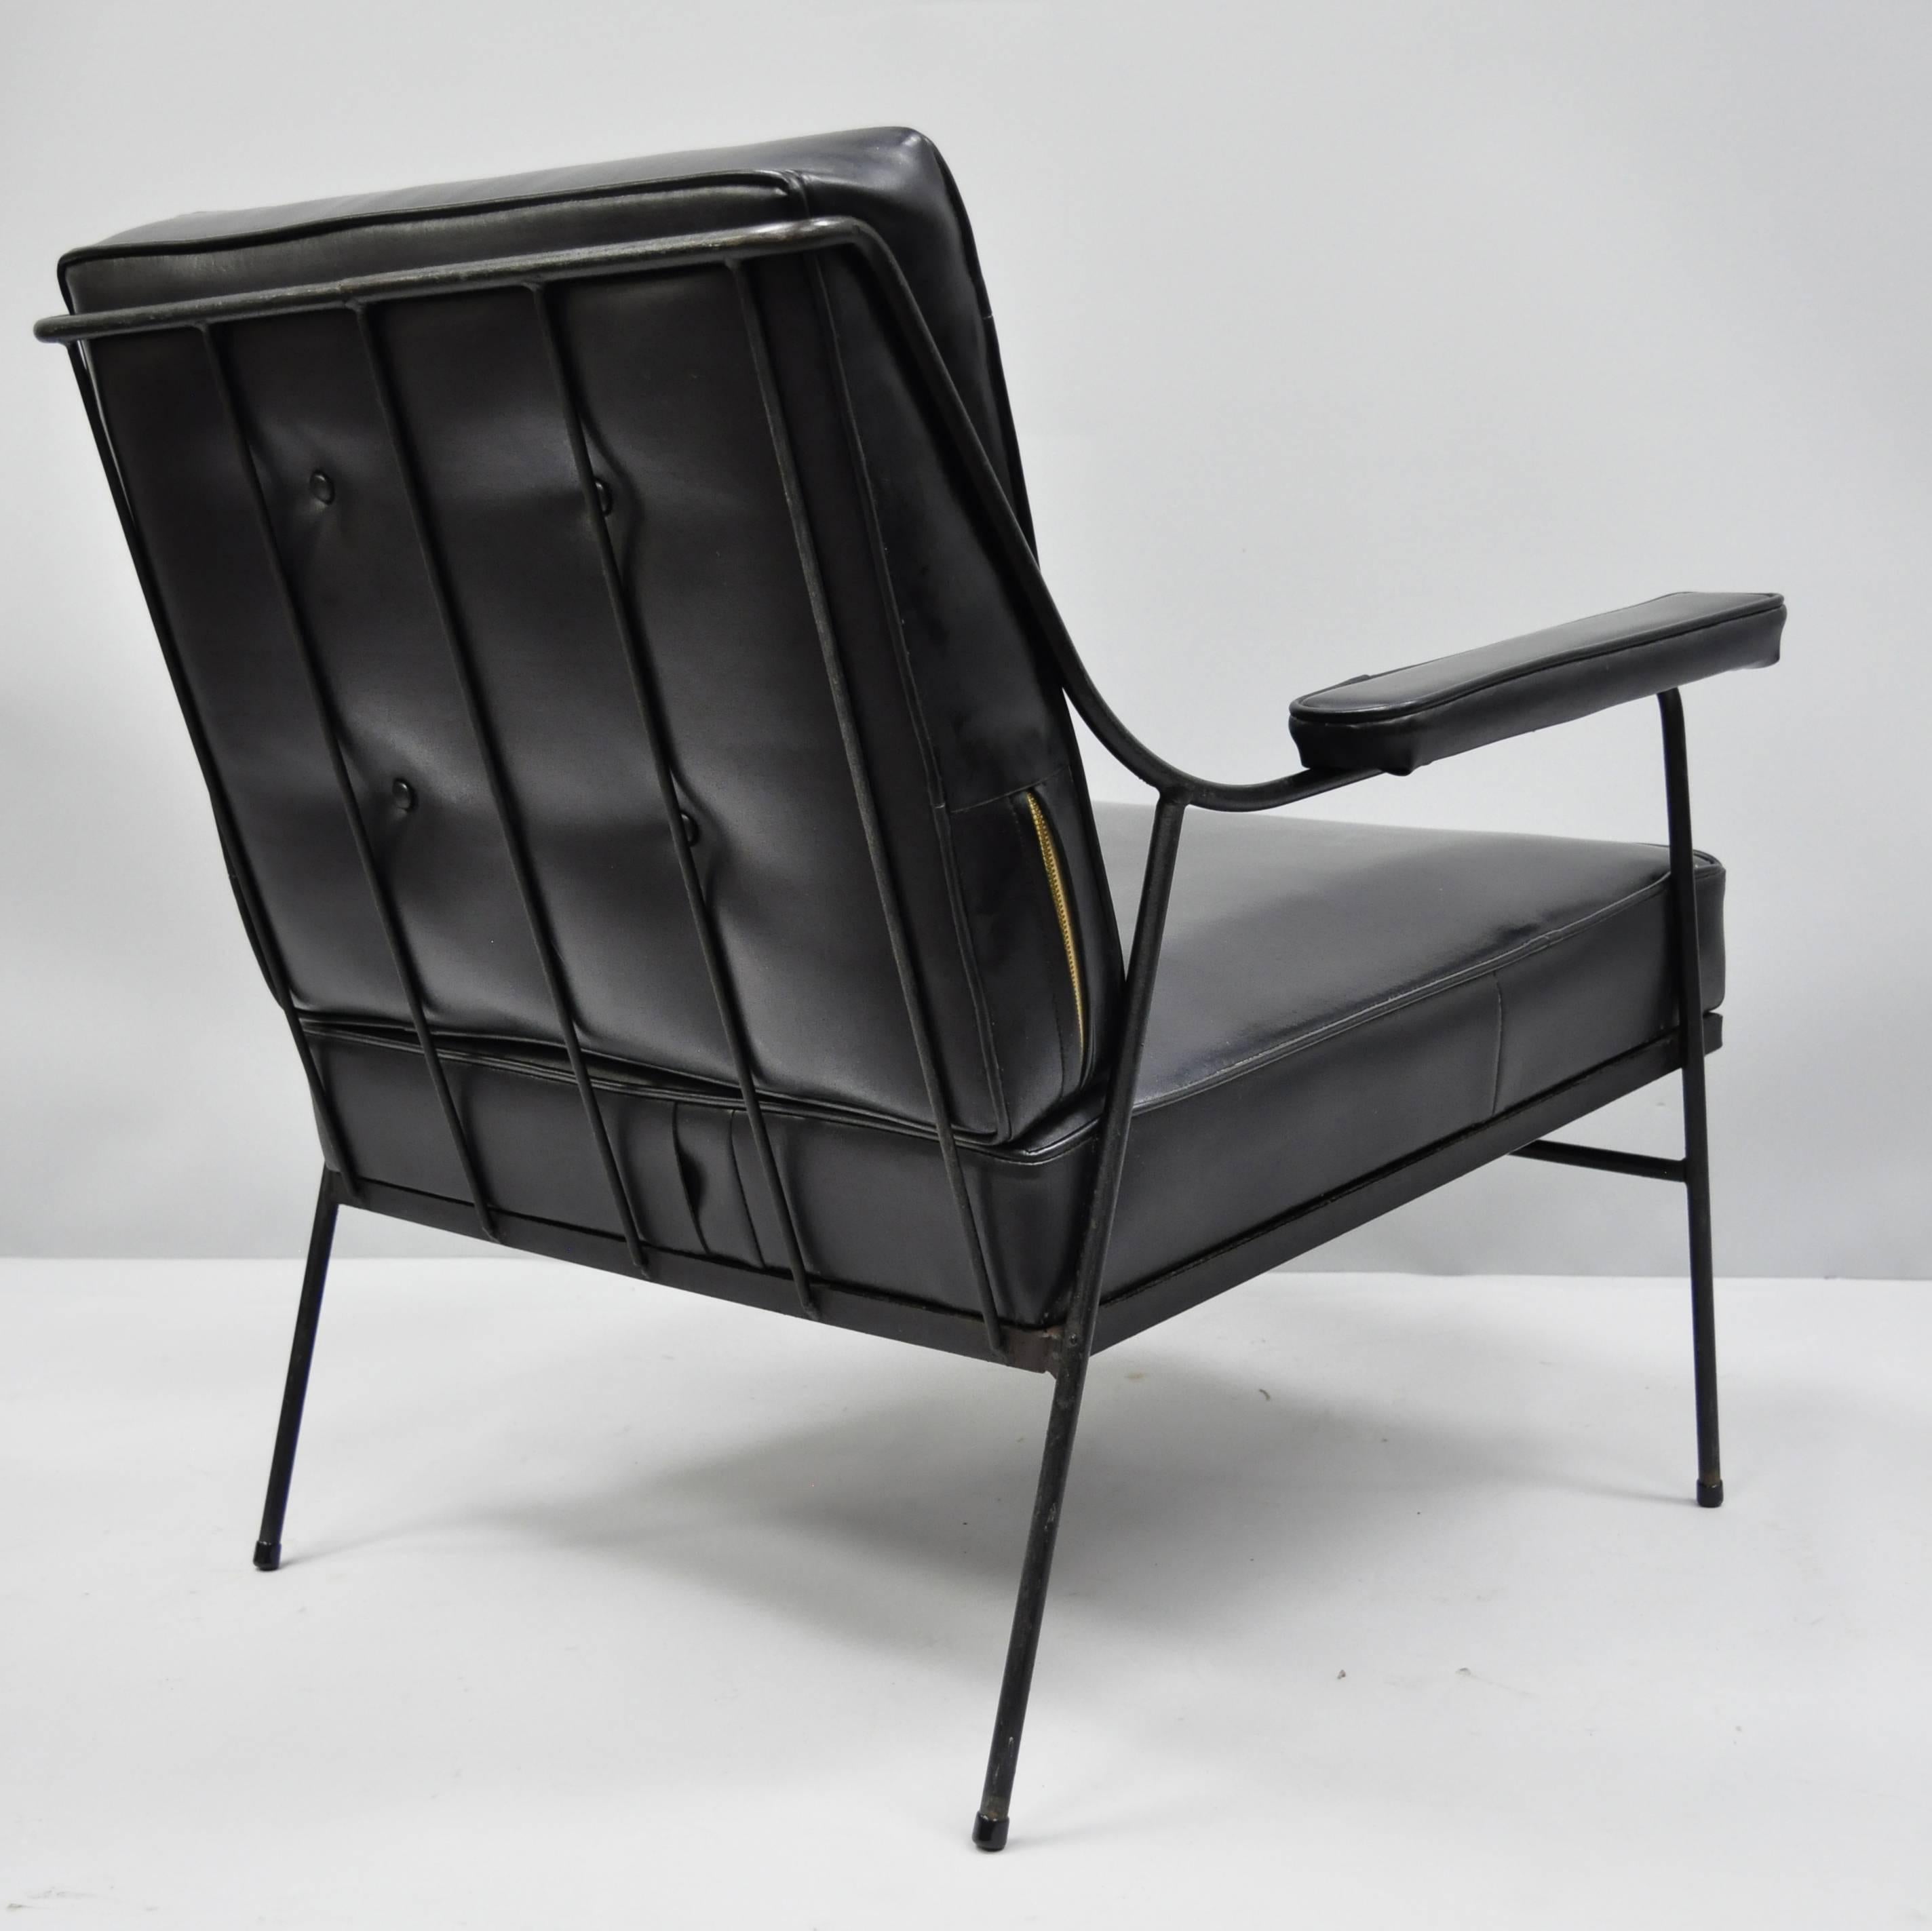 Rare Mid Century Modern Wrought Iron & Black Naugahyde Lounge Chair attributed to Milo Baughman for Pacific Iron Products. Item features button tufted black vinyl cushions, loose back cushion, wrought iron construction, upholstered armrests, quality